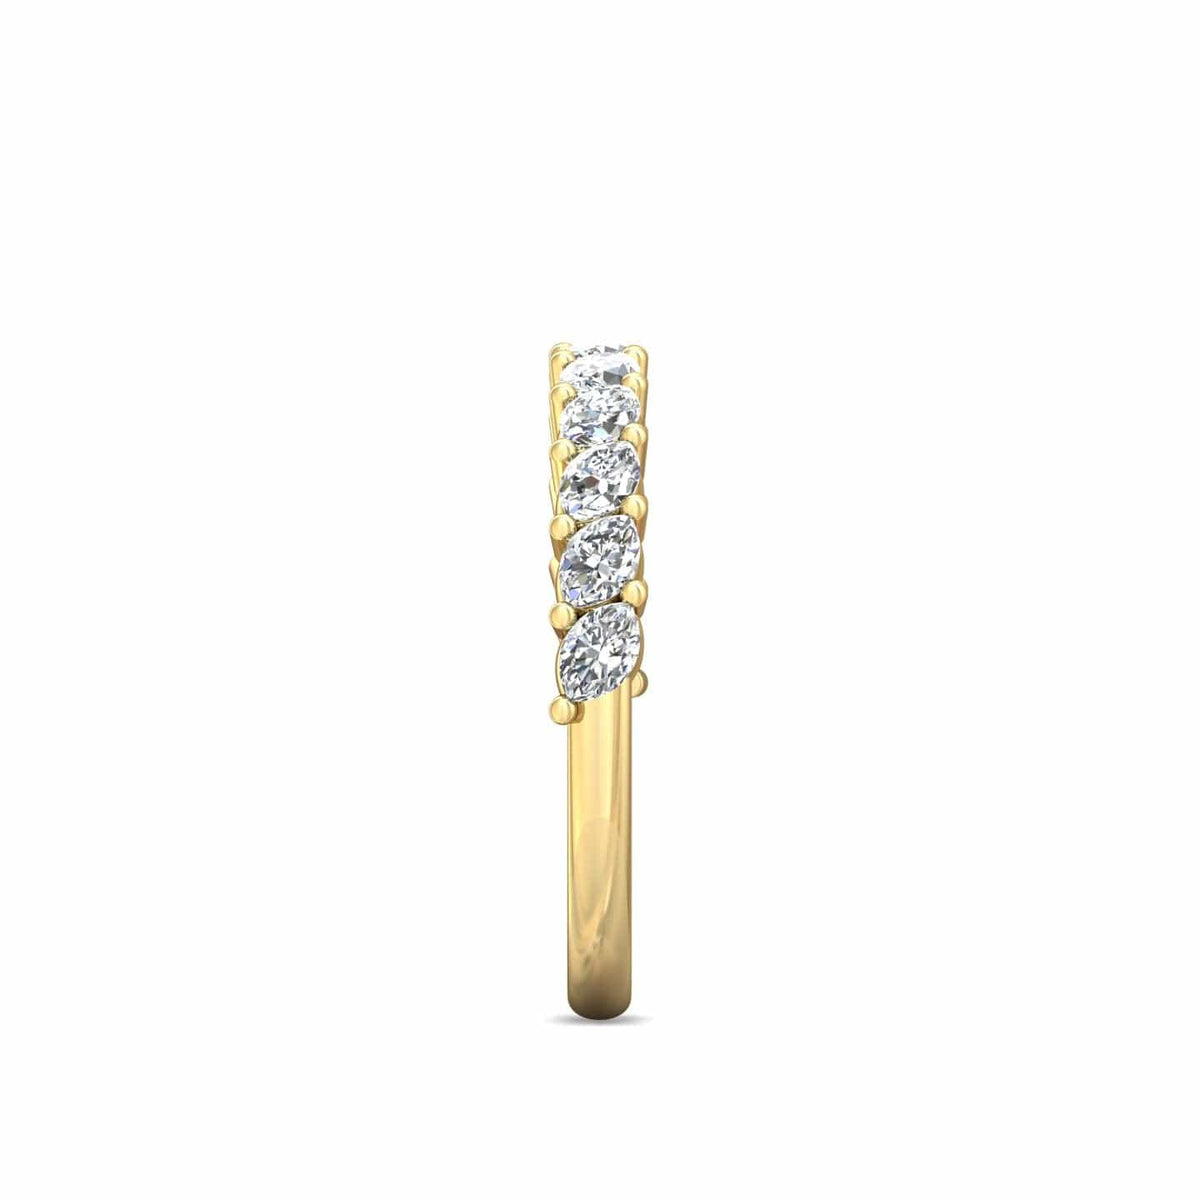 18K Yellow Gold Shared Prong Marquise Diamond Band